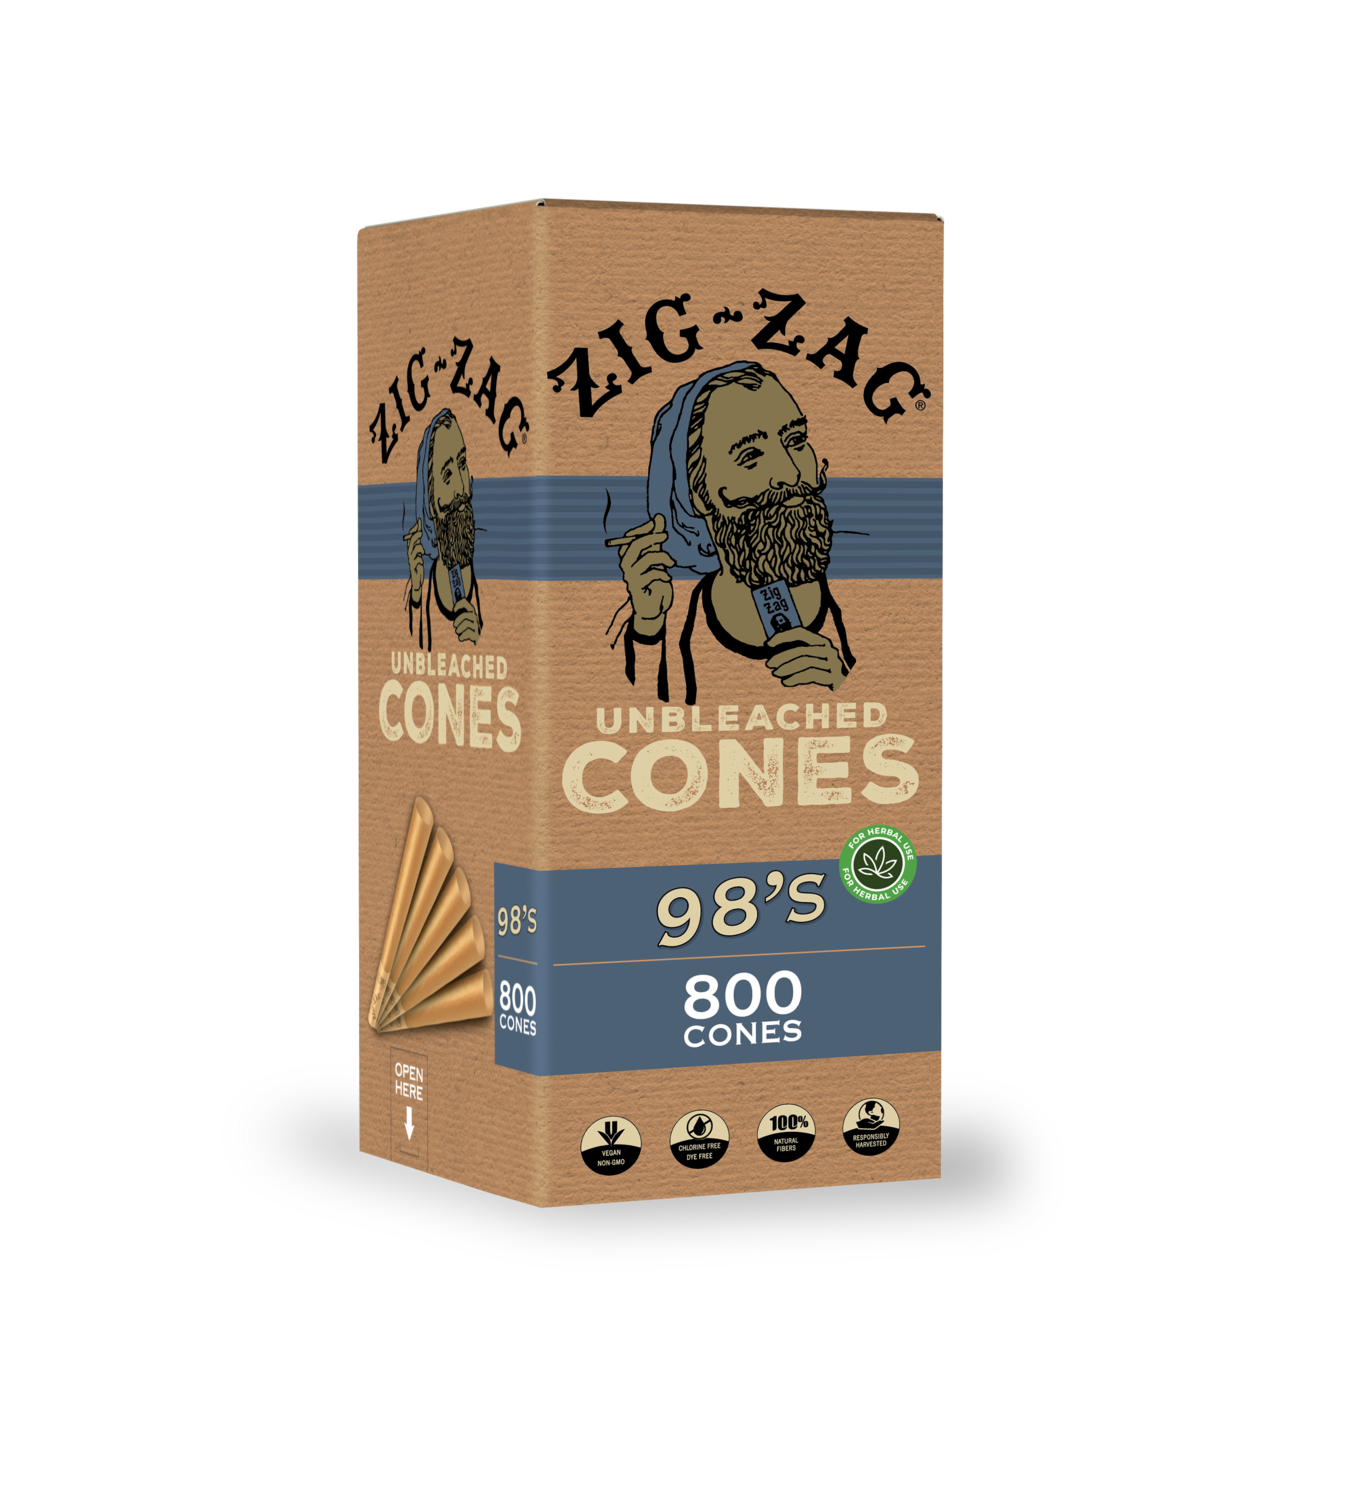 Zig Zag 98mm Pre-Rolled Cones (White and Brown) FAST 1-2 Week Shipping!